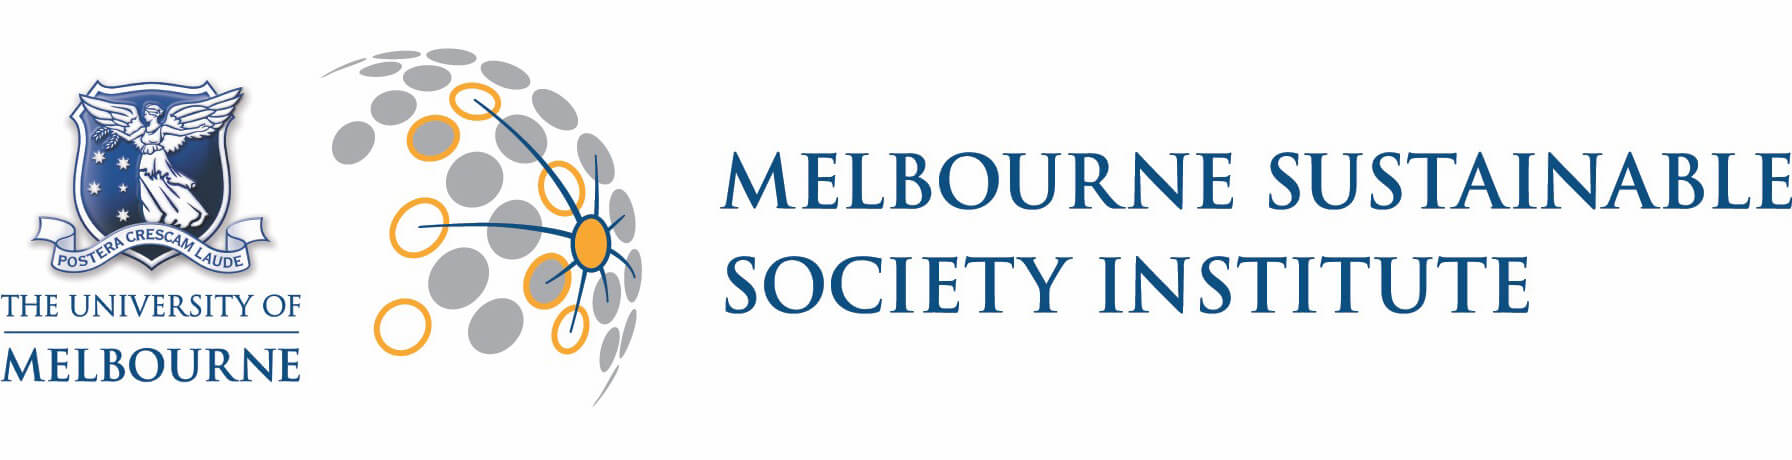 Melbourne Sustainable Society Institute